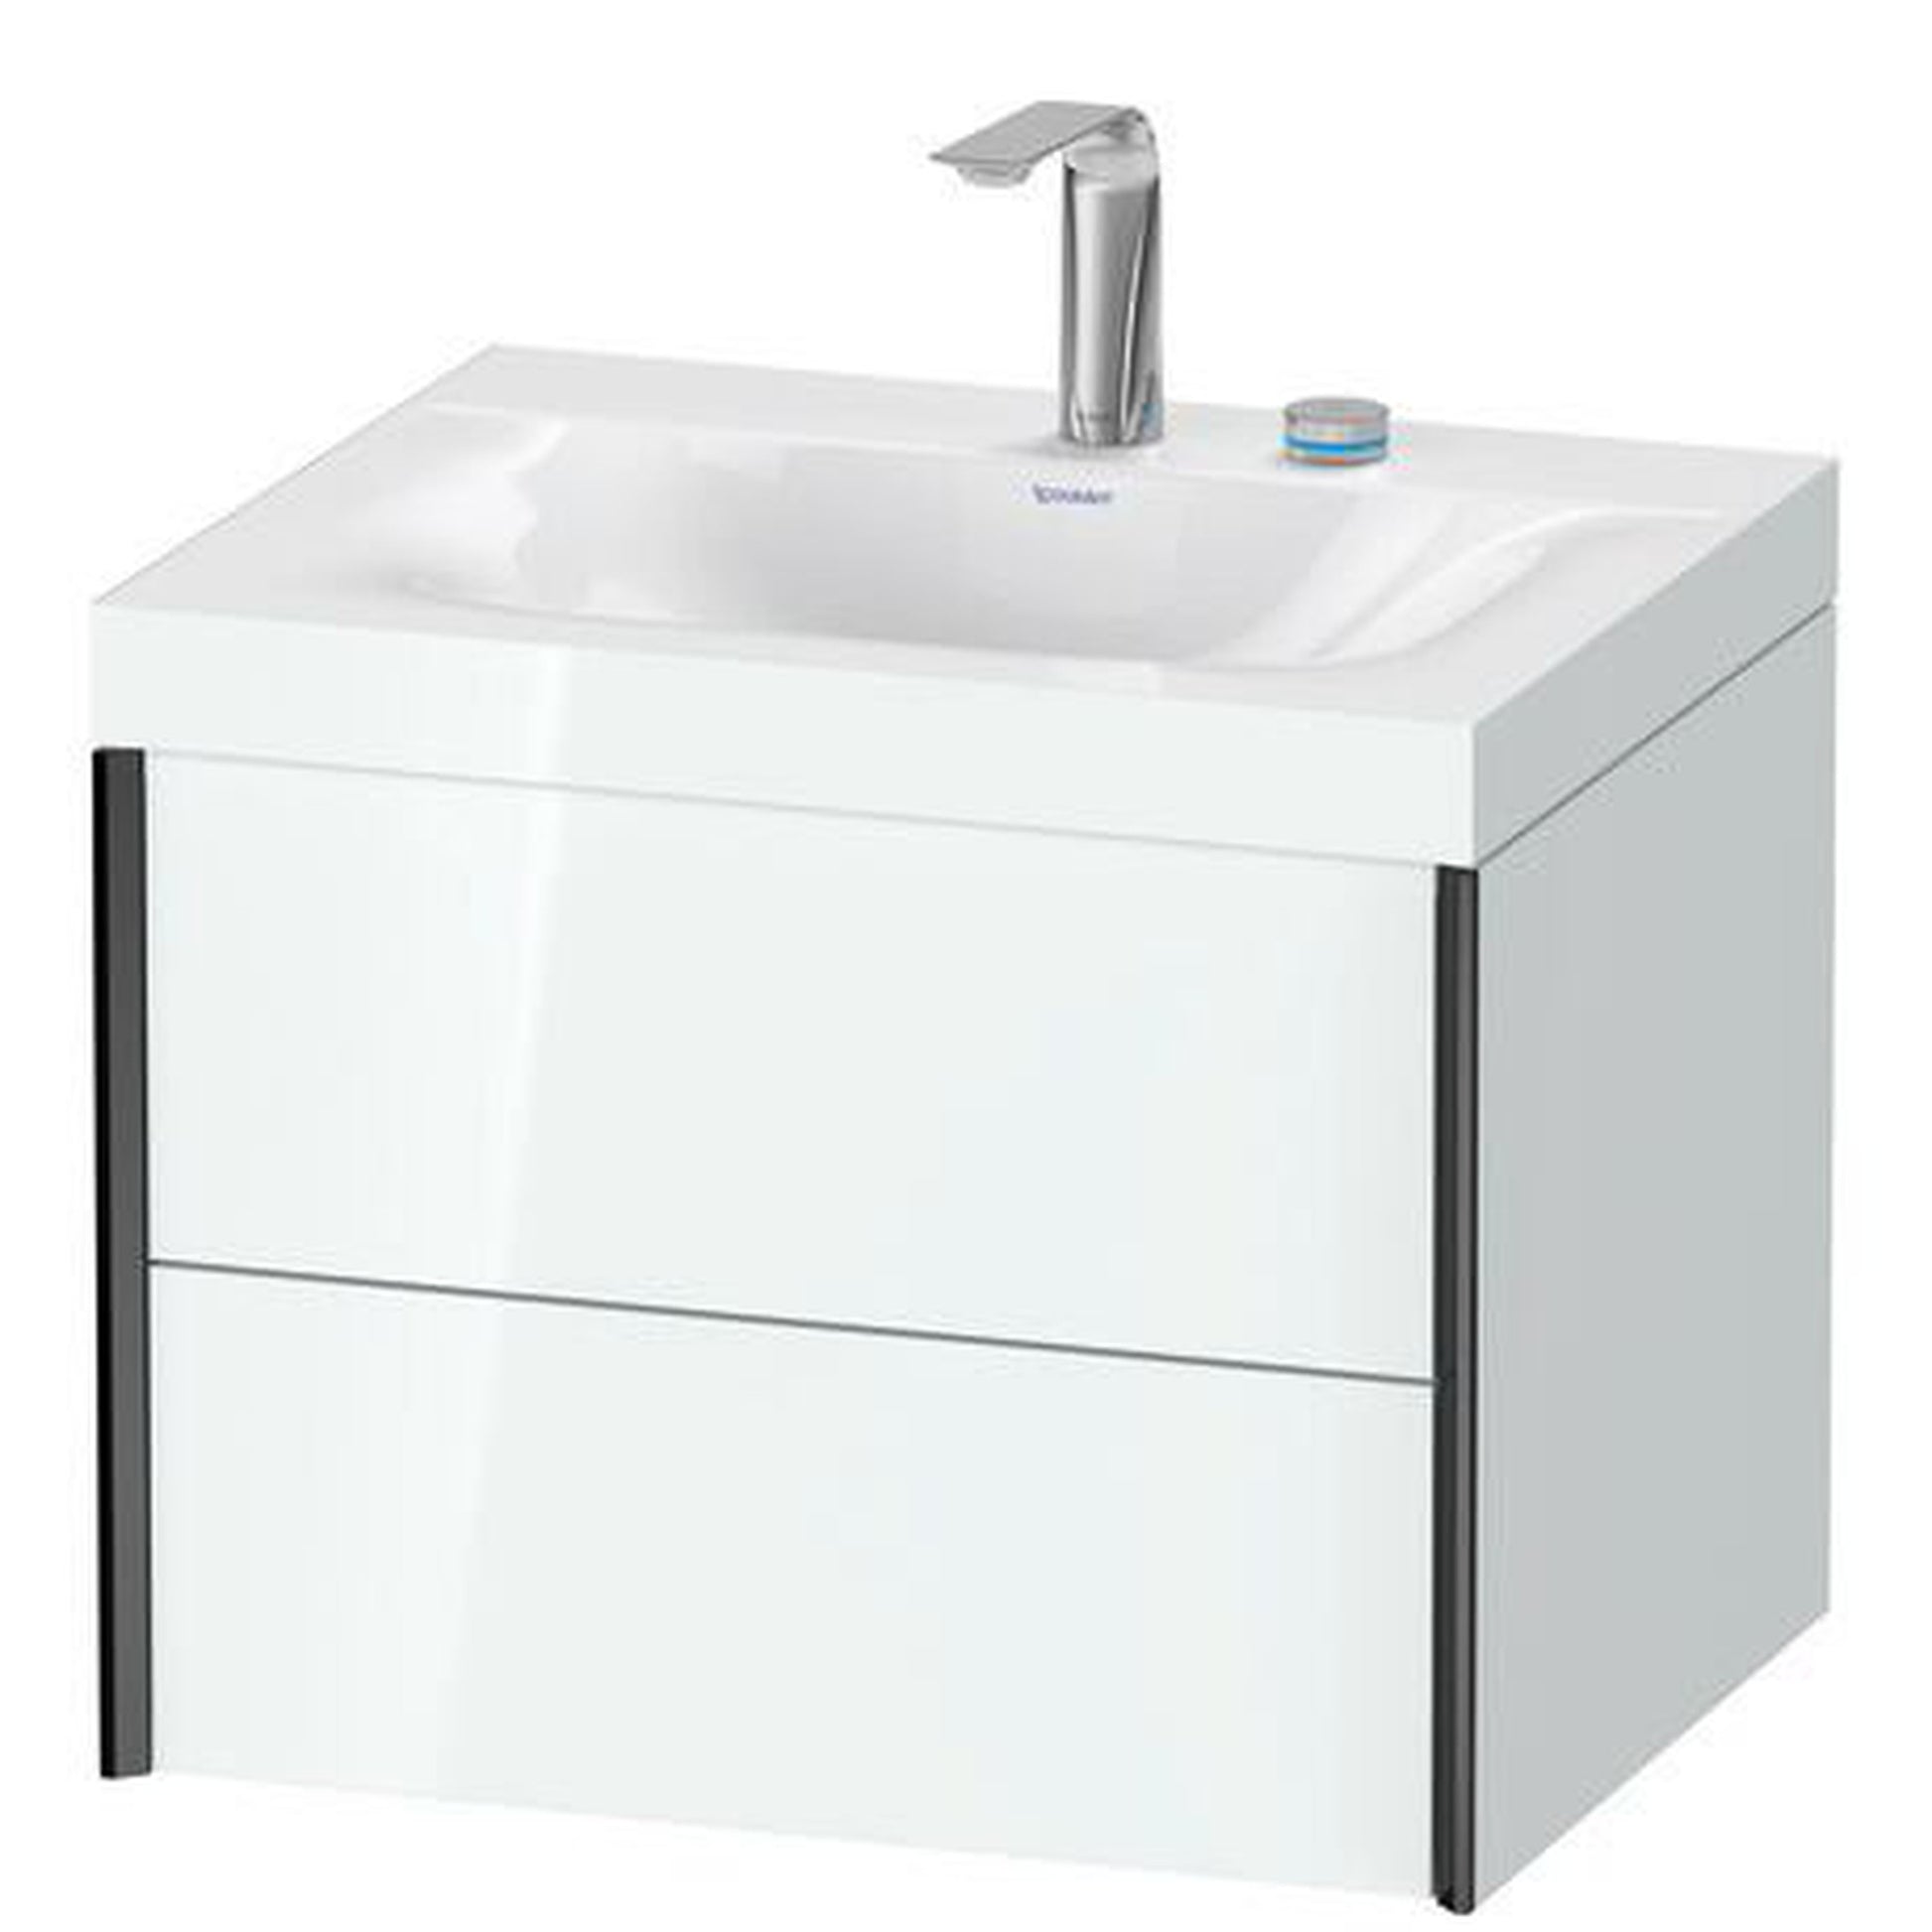 Duravit Xviu 24" x 20" x 19" Two Drawer C-Bonded Wall-Mount Vanity Kit With Two Tap Holes, White (XV4614EB285C)